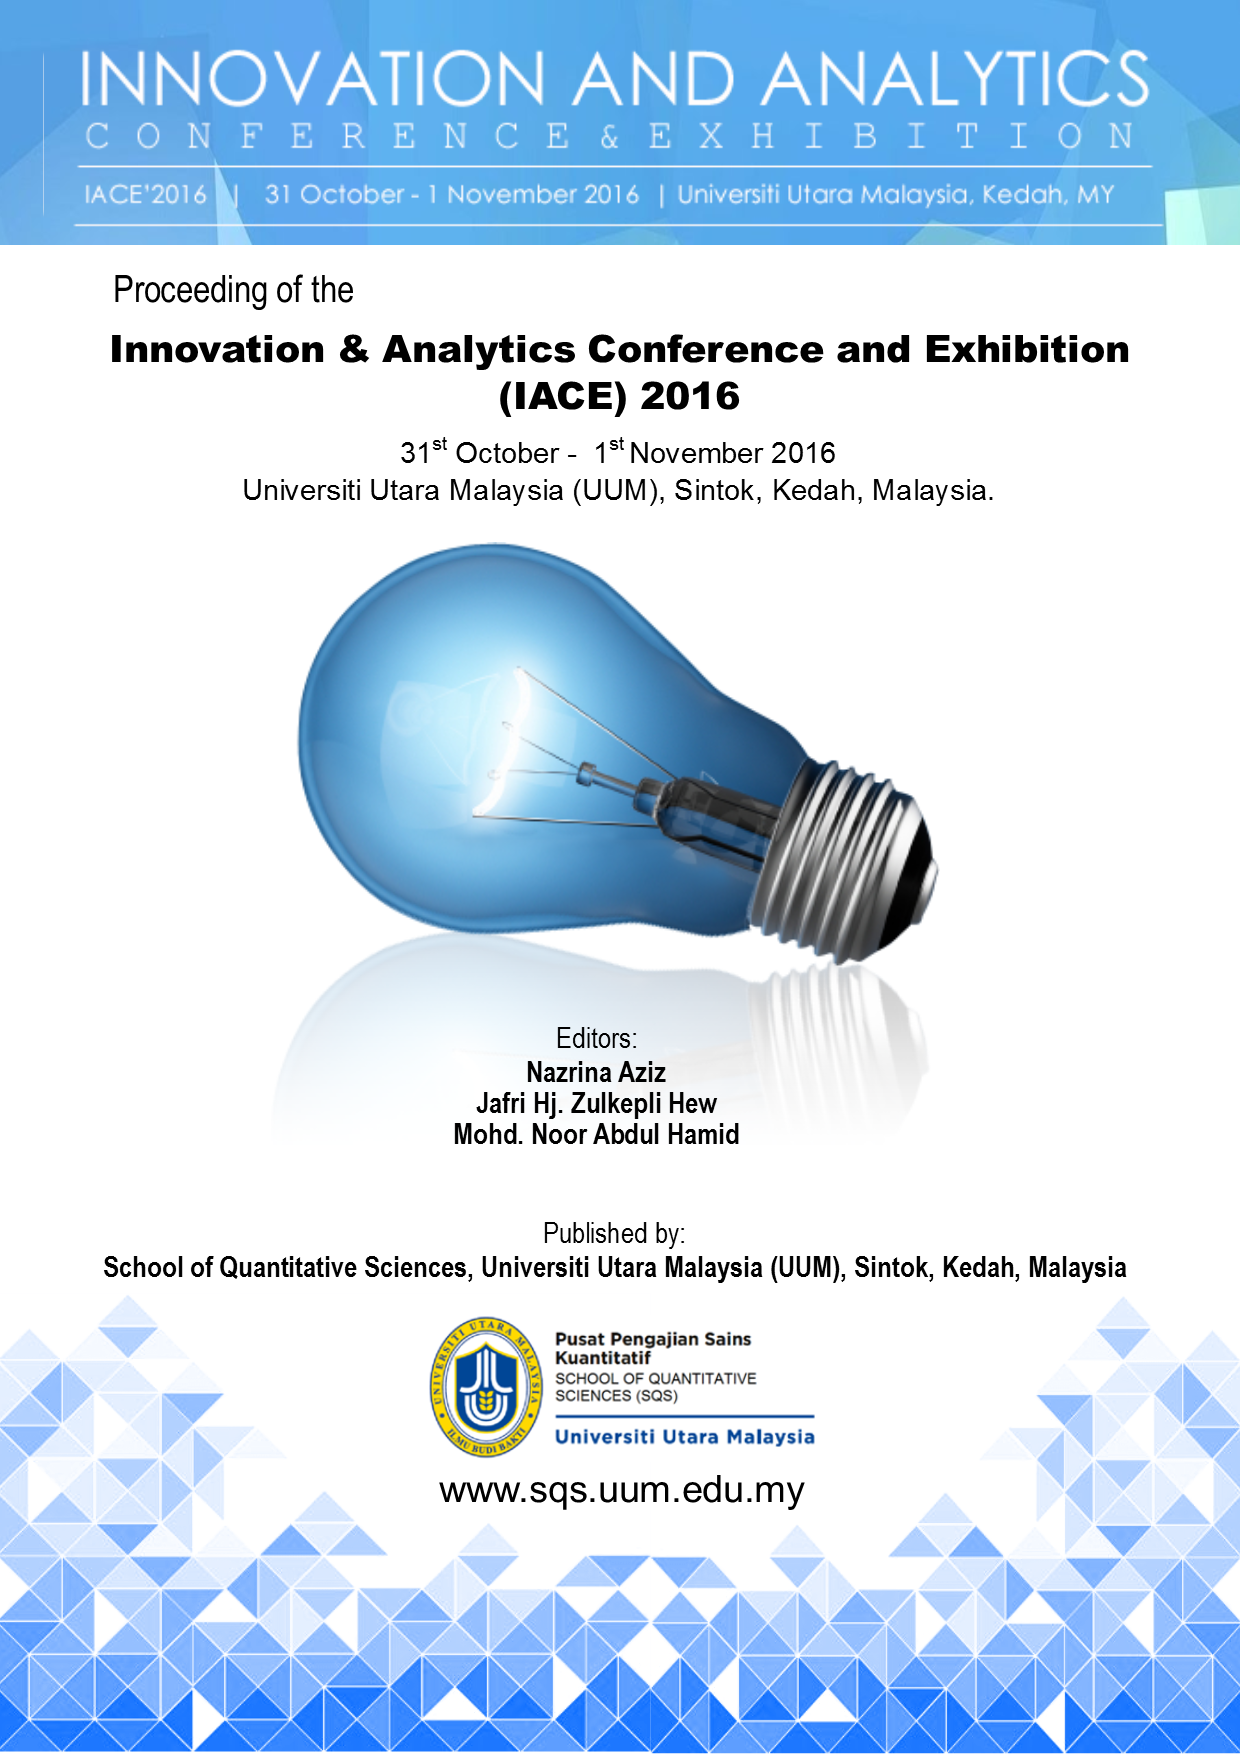 Proceedings of the Innovation and Analytics Conference & Exhibition (IACE) 2016